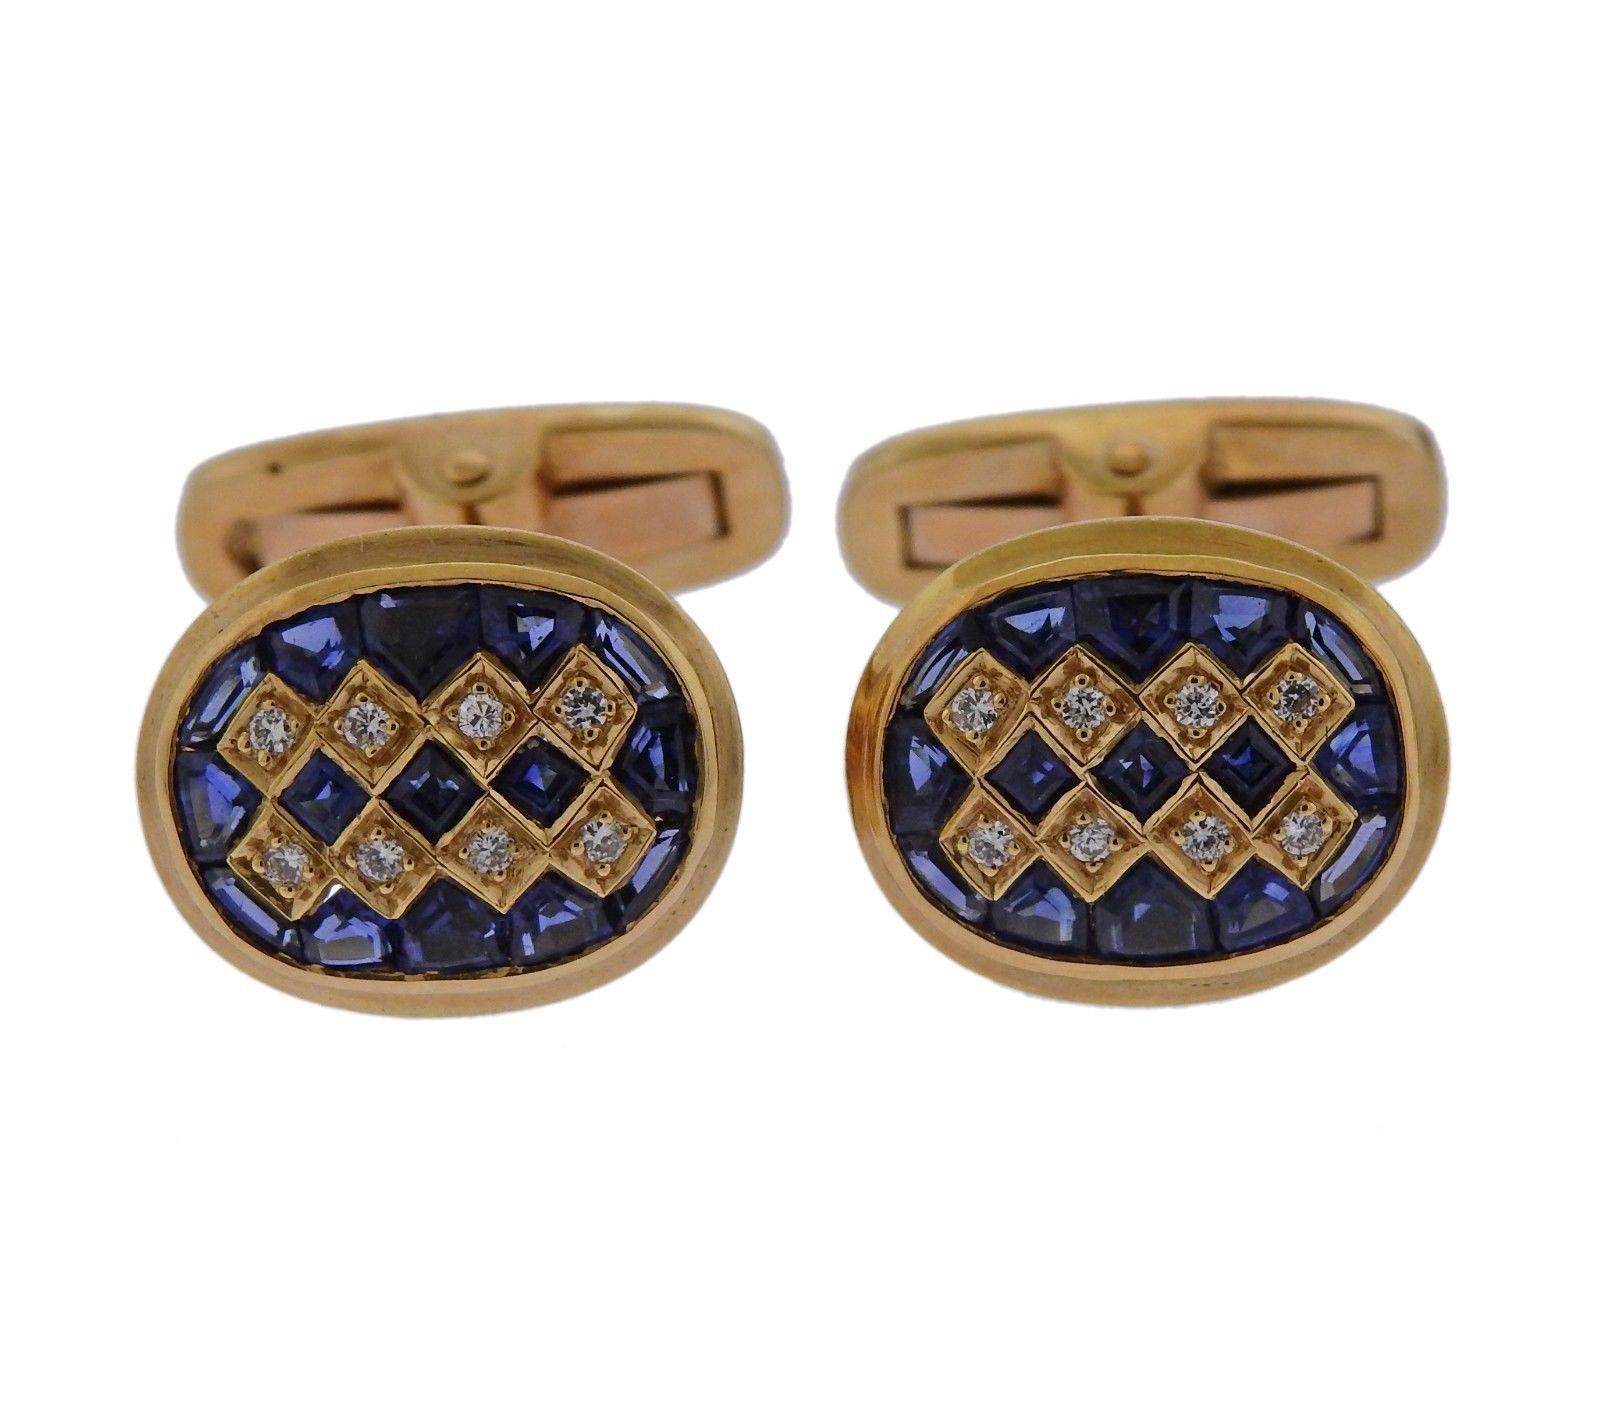 Set of 18k gold cufflinks and stud set. Featuring sapphires and approximately 0.20ctw of H/SI diamonds. Cufflink tops measure 15mm X 12mm, Stud tops measure 13mm X 12mm, total weight is 23.6 grams. 